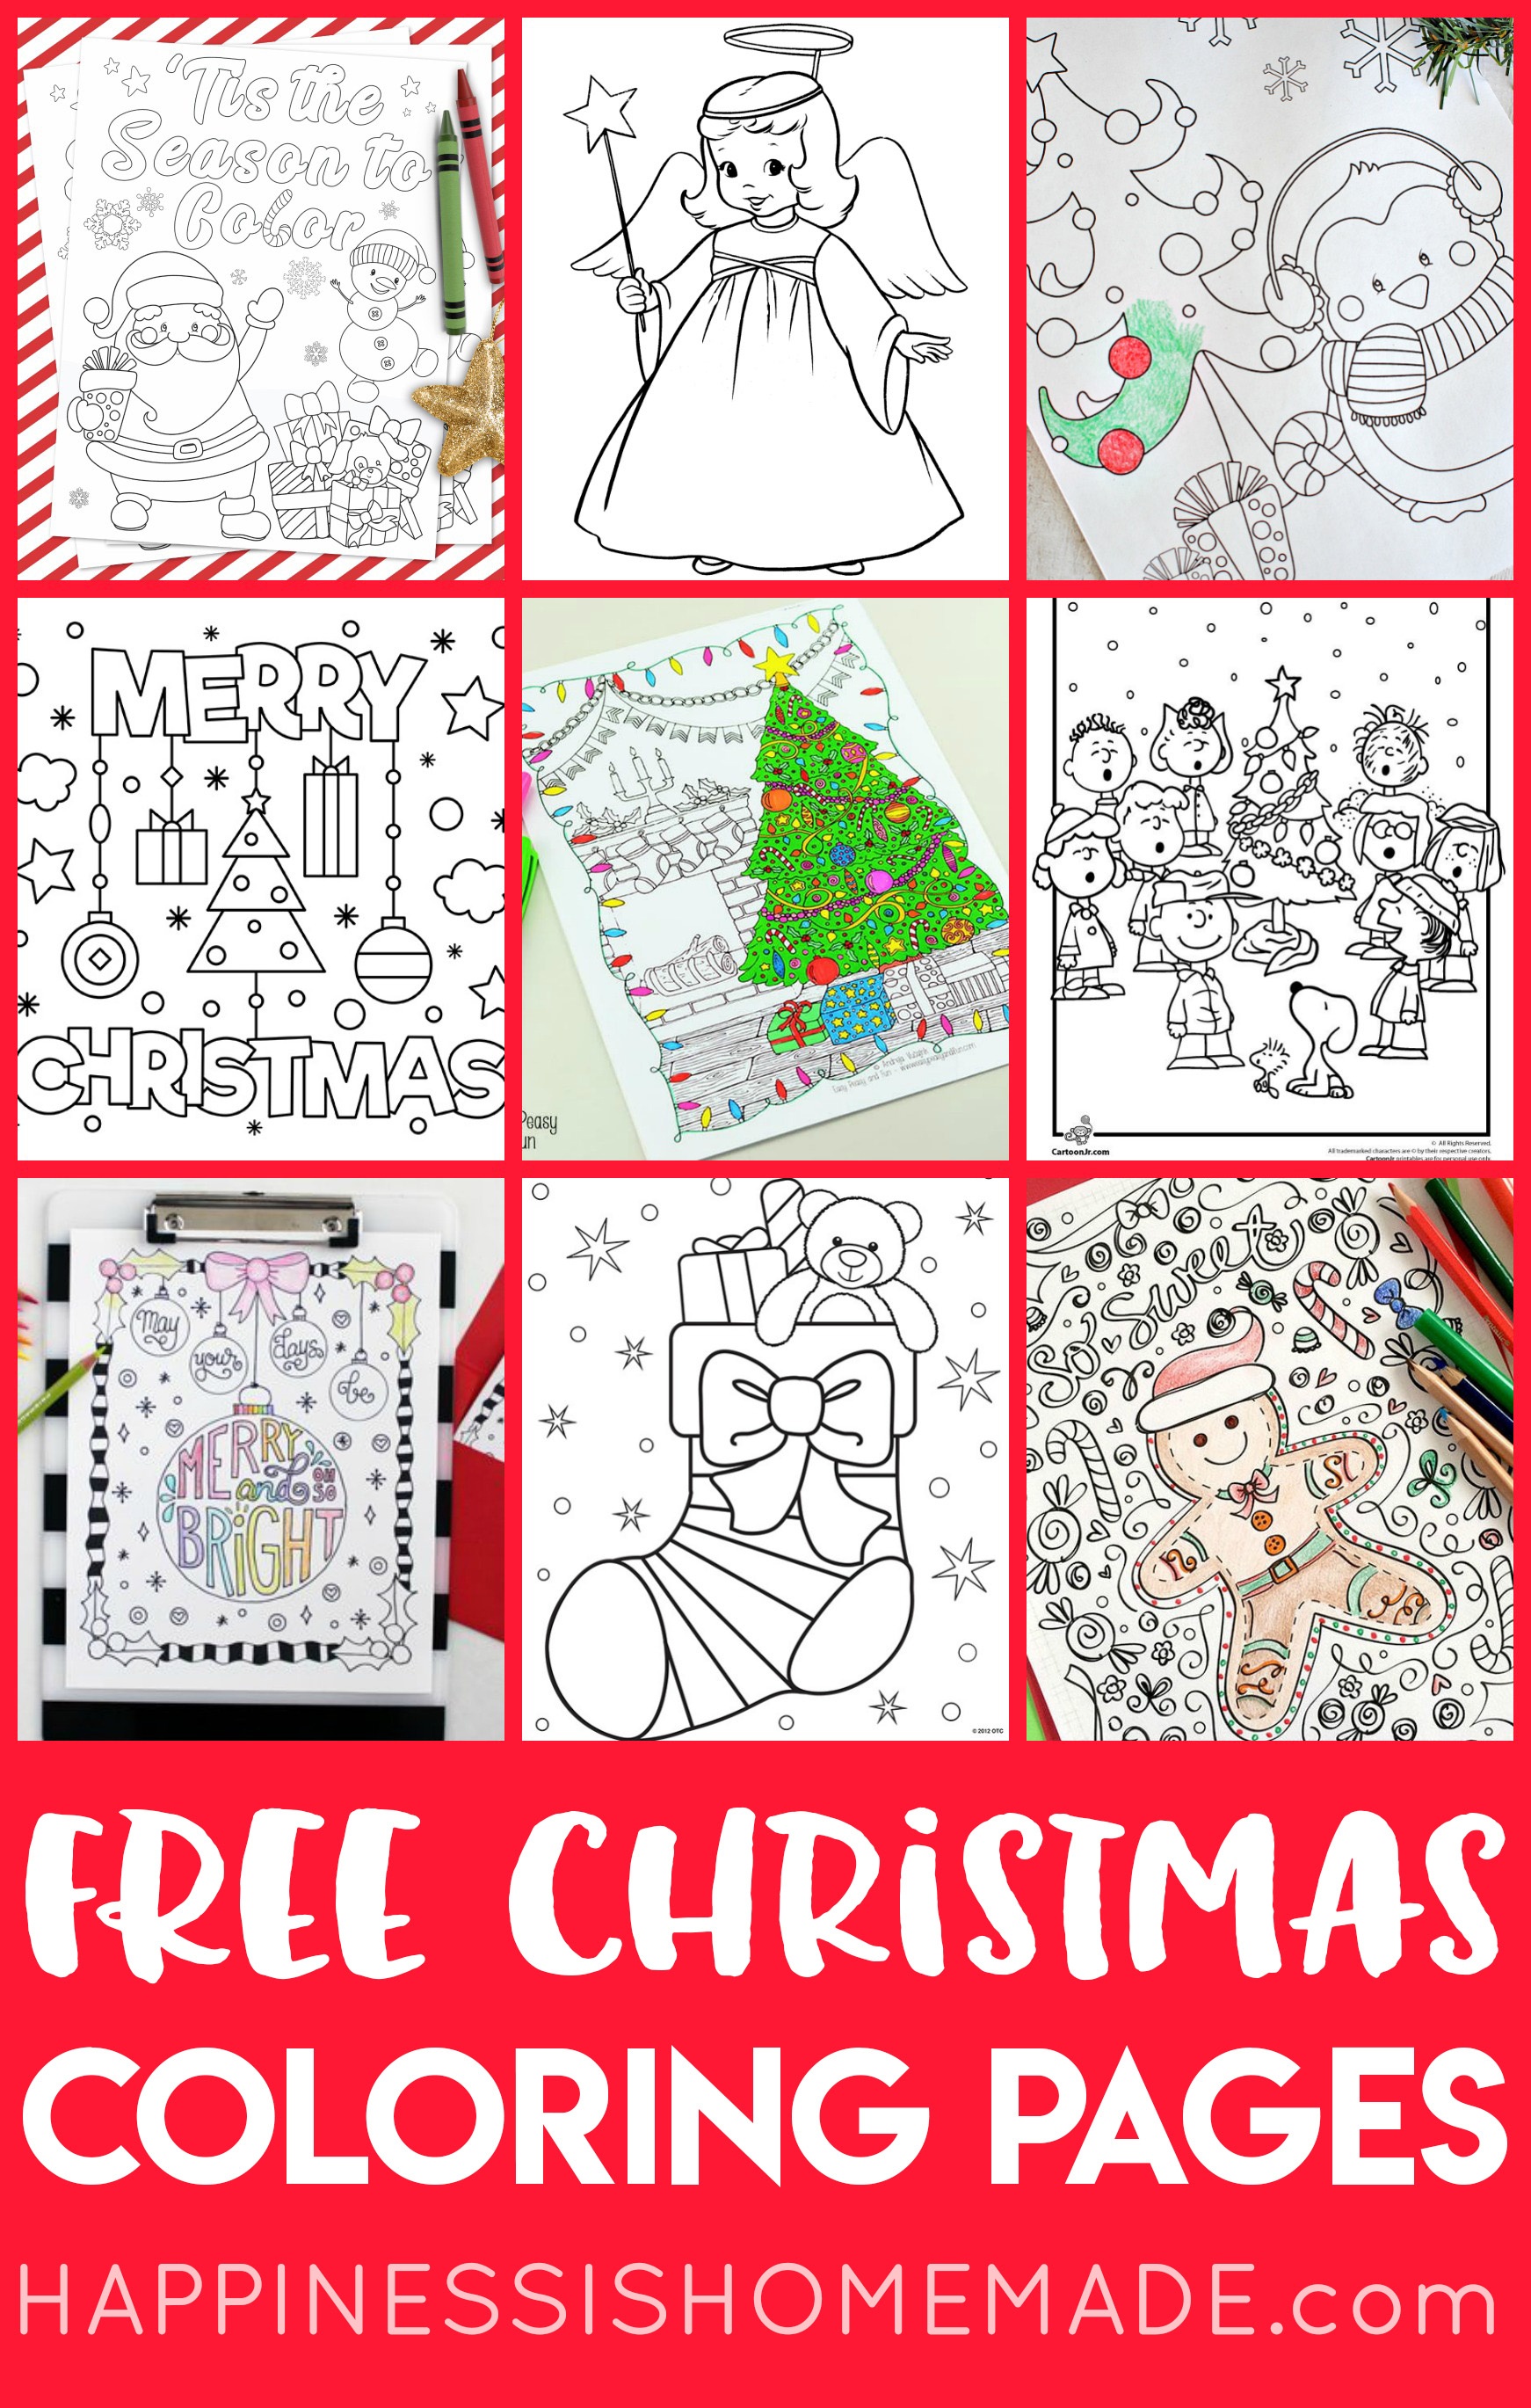 Free Christmas Coloring Pages For Adults And Kids - Happiness Is - Free Printable Christmas Books For Kindergarten